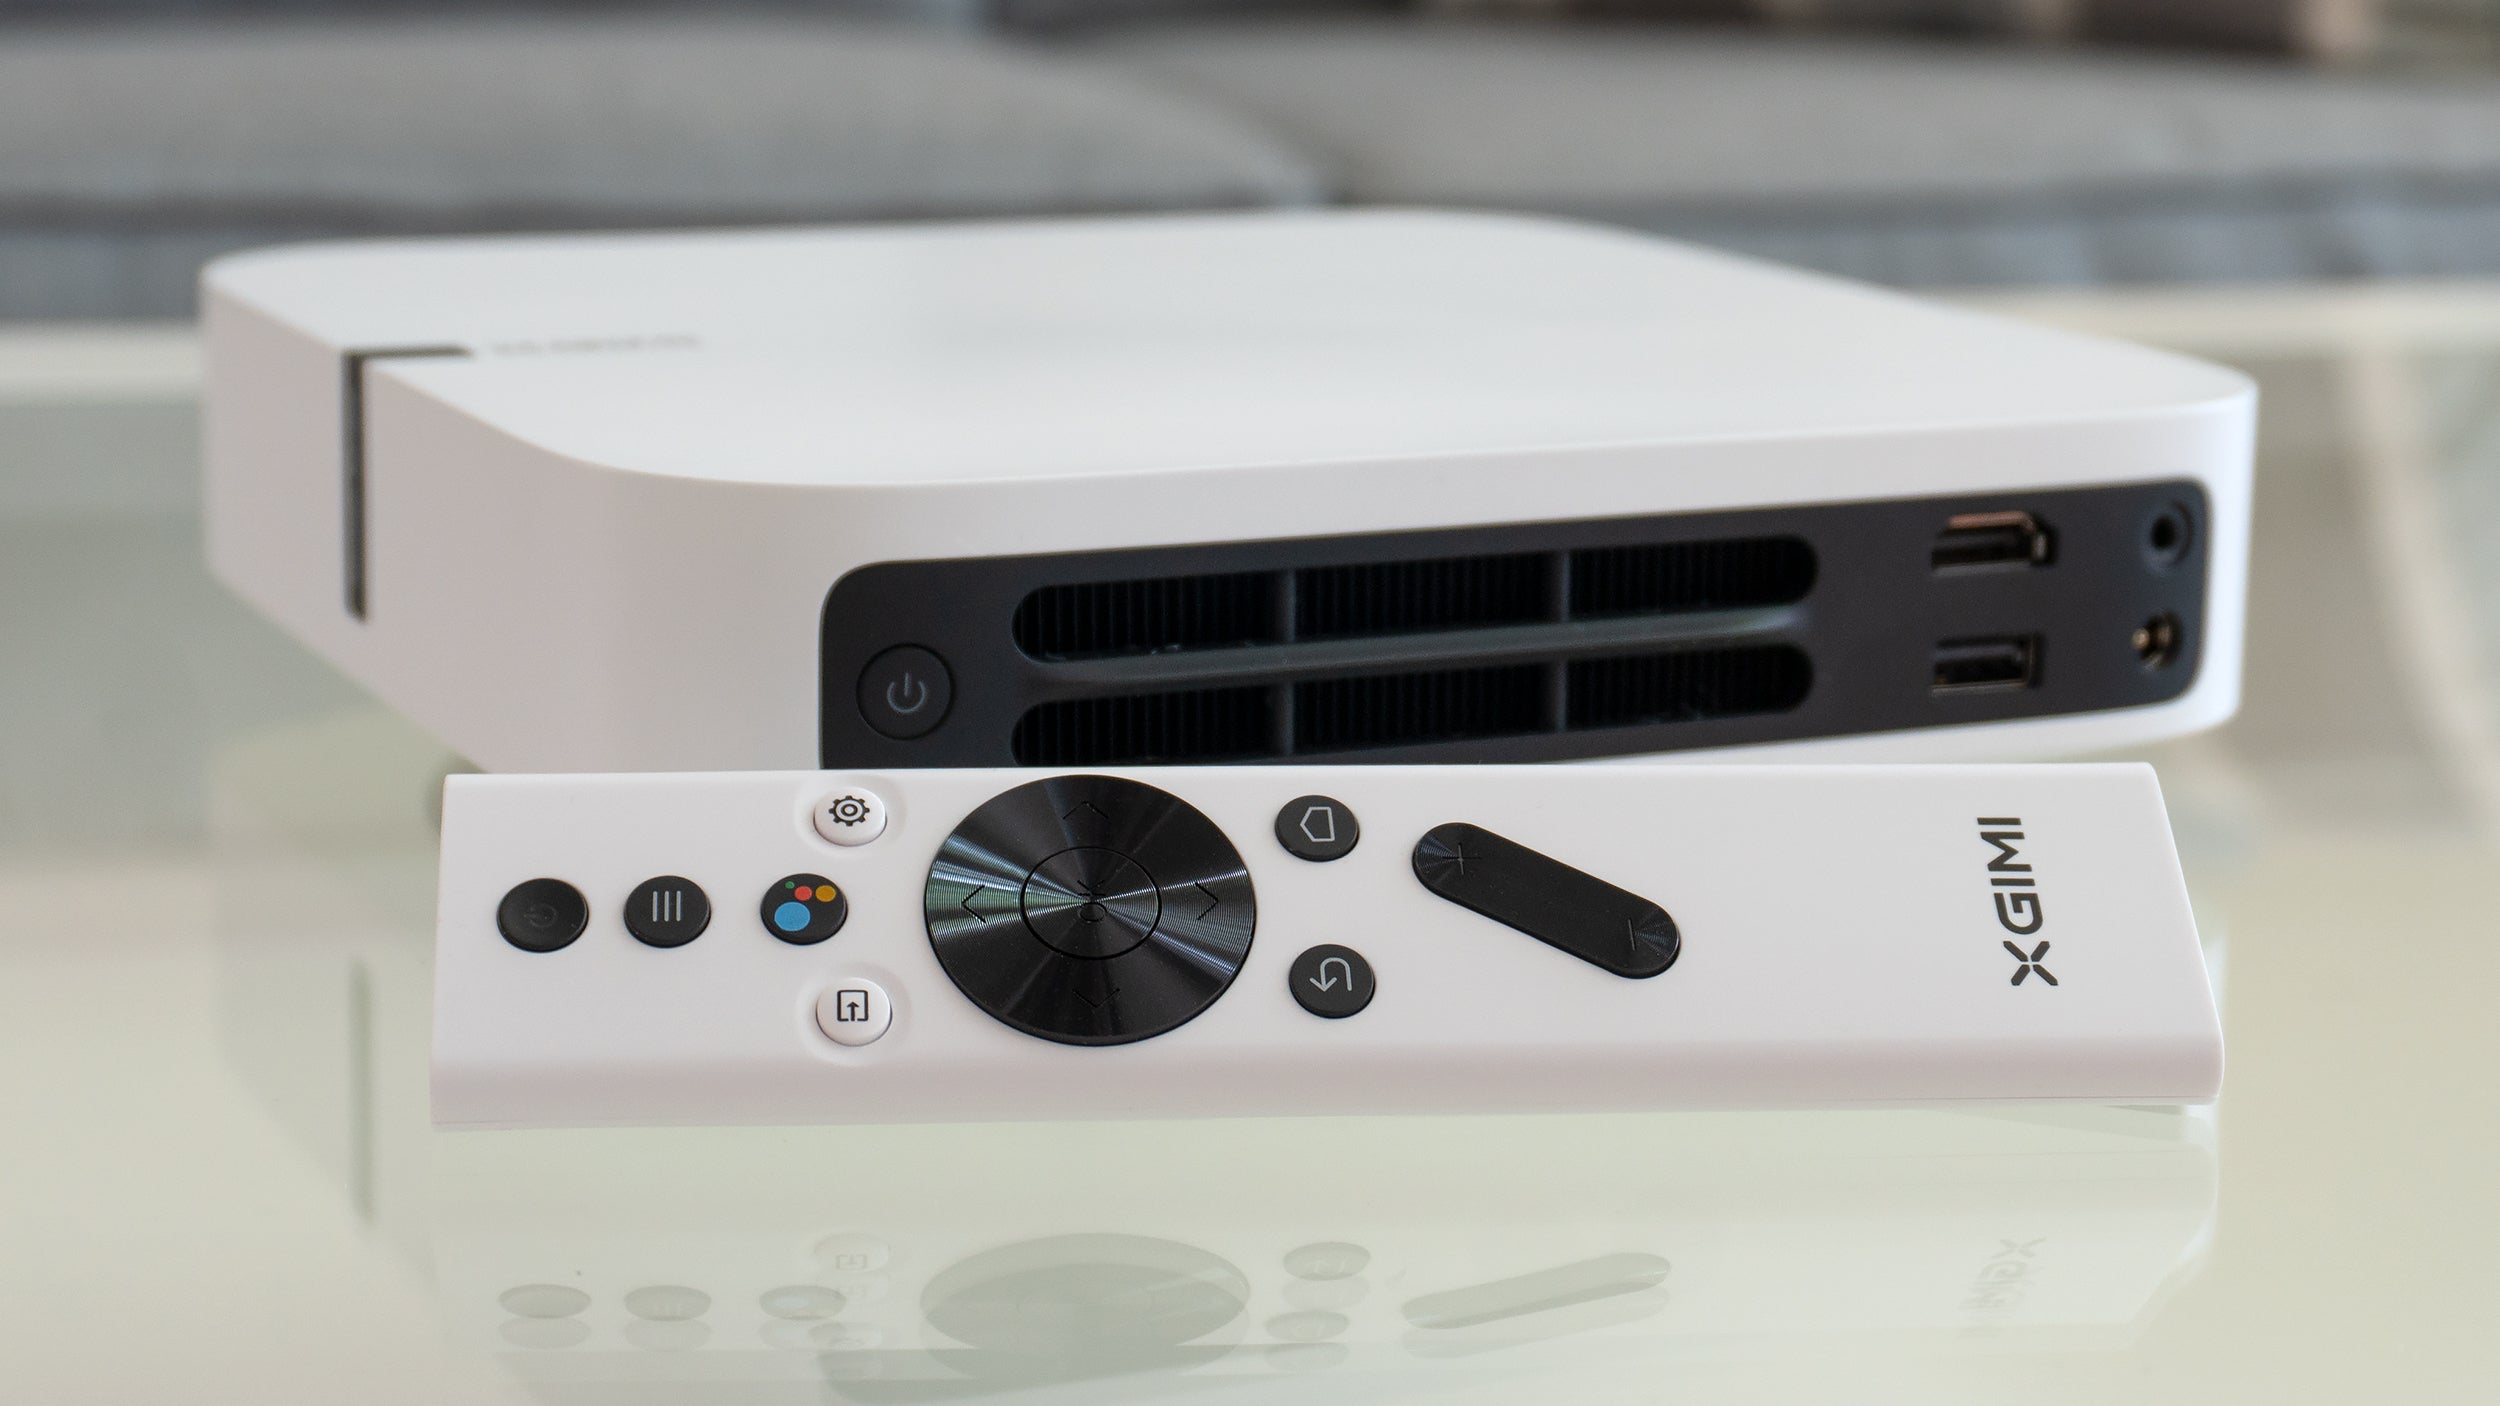 The only button on the XGIMI Elfin projector is for power, so you'll want to be extra careful not to misplace the included remote. (Photo: Andrew Liszewski - Gizmodo)